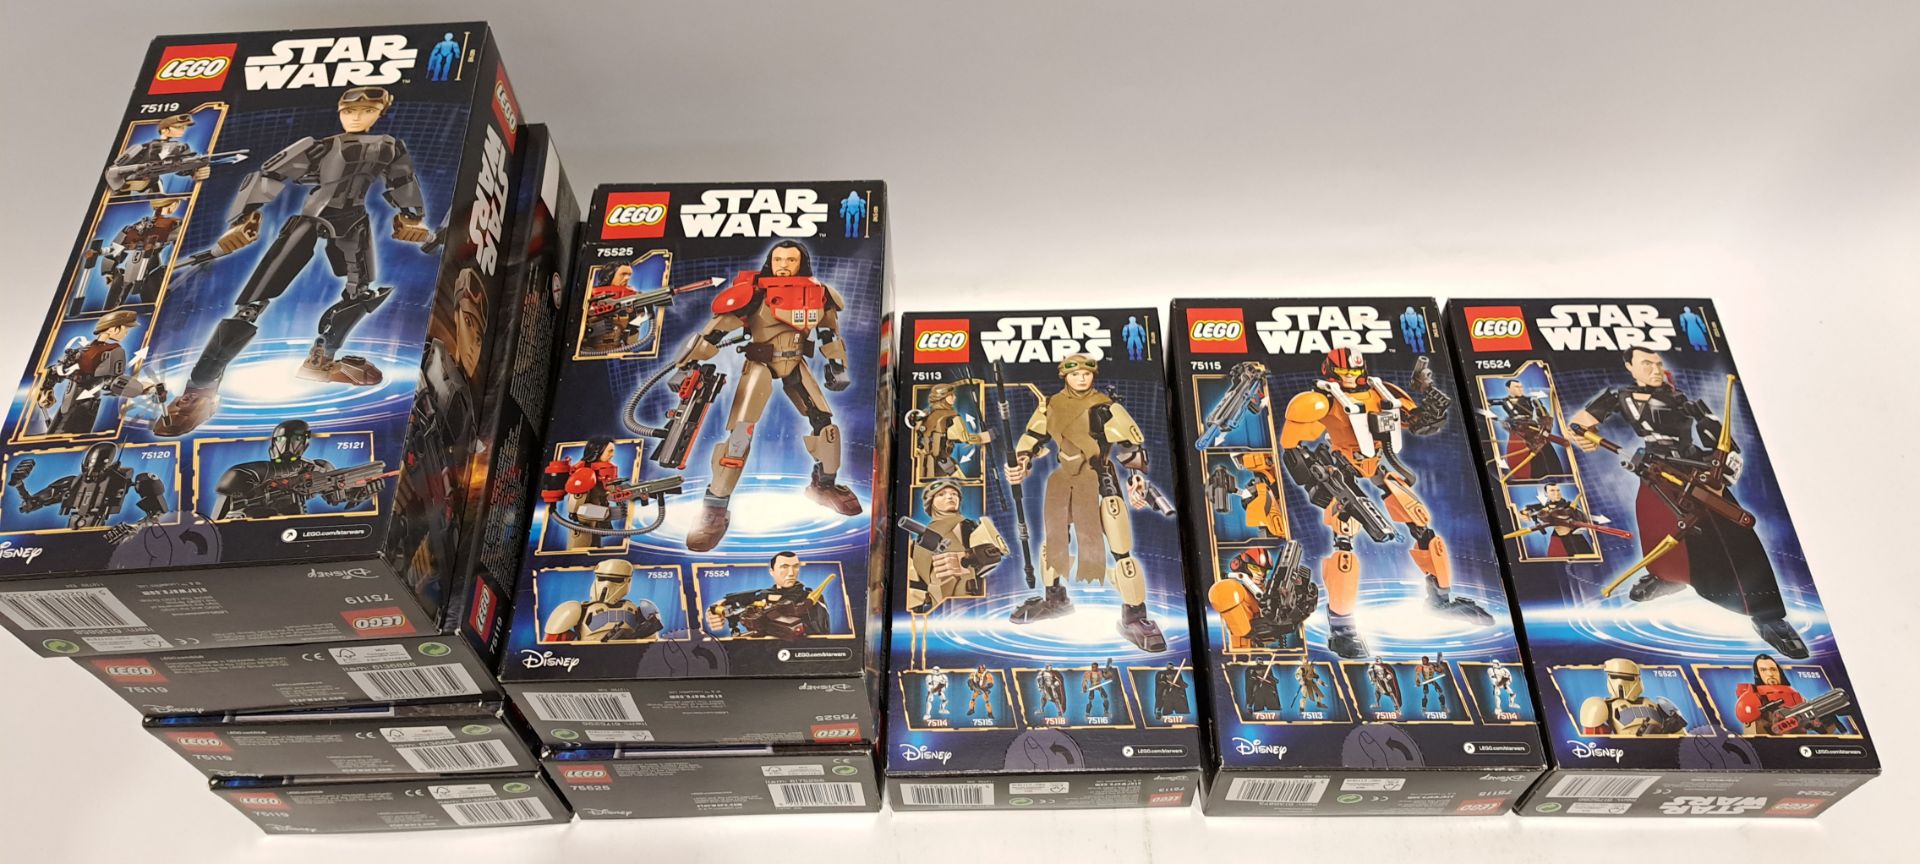 Quantity of Lego Star Wars Sets x9 (Includes Duplicates) - Image 2 of 2